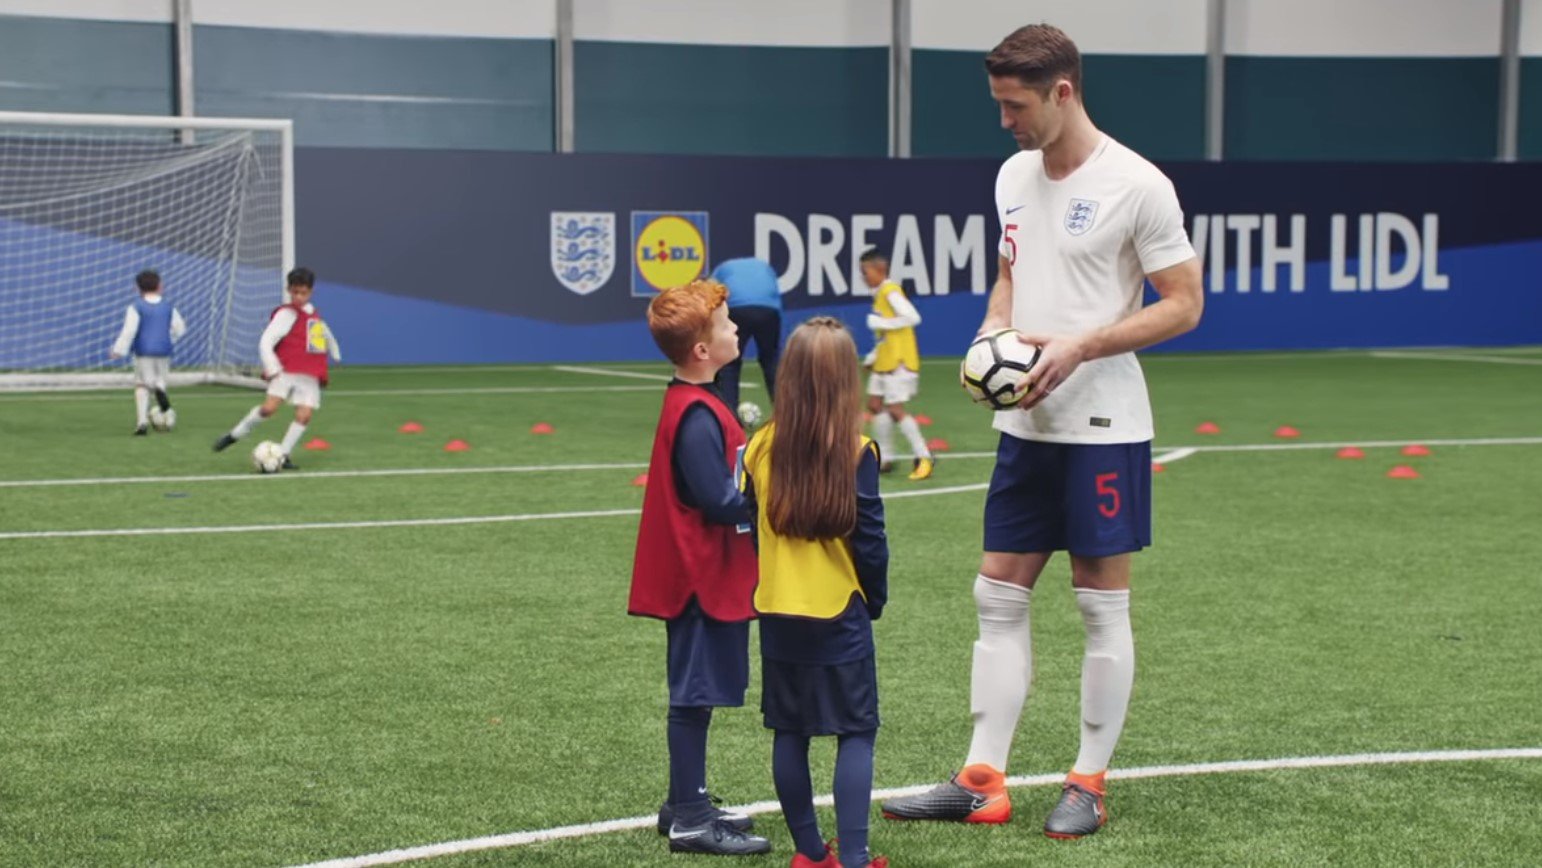 lidl world cup advert